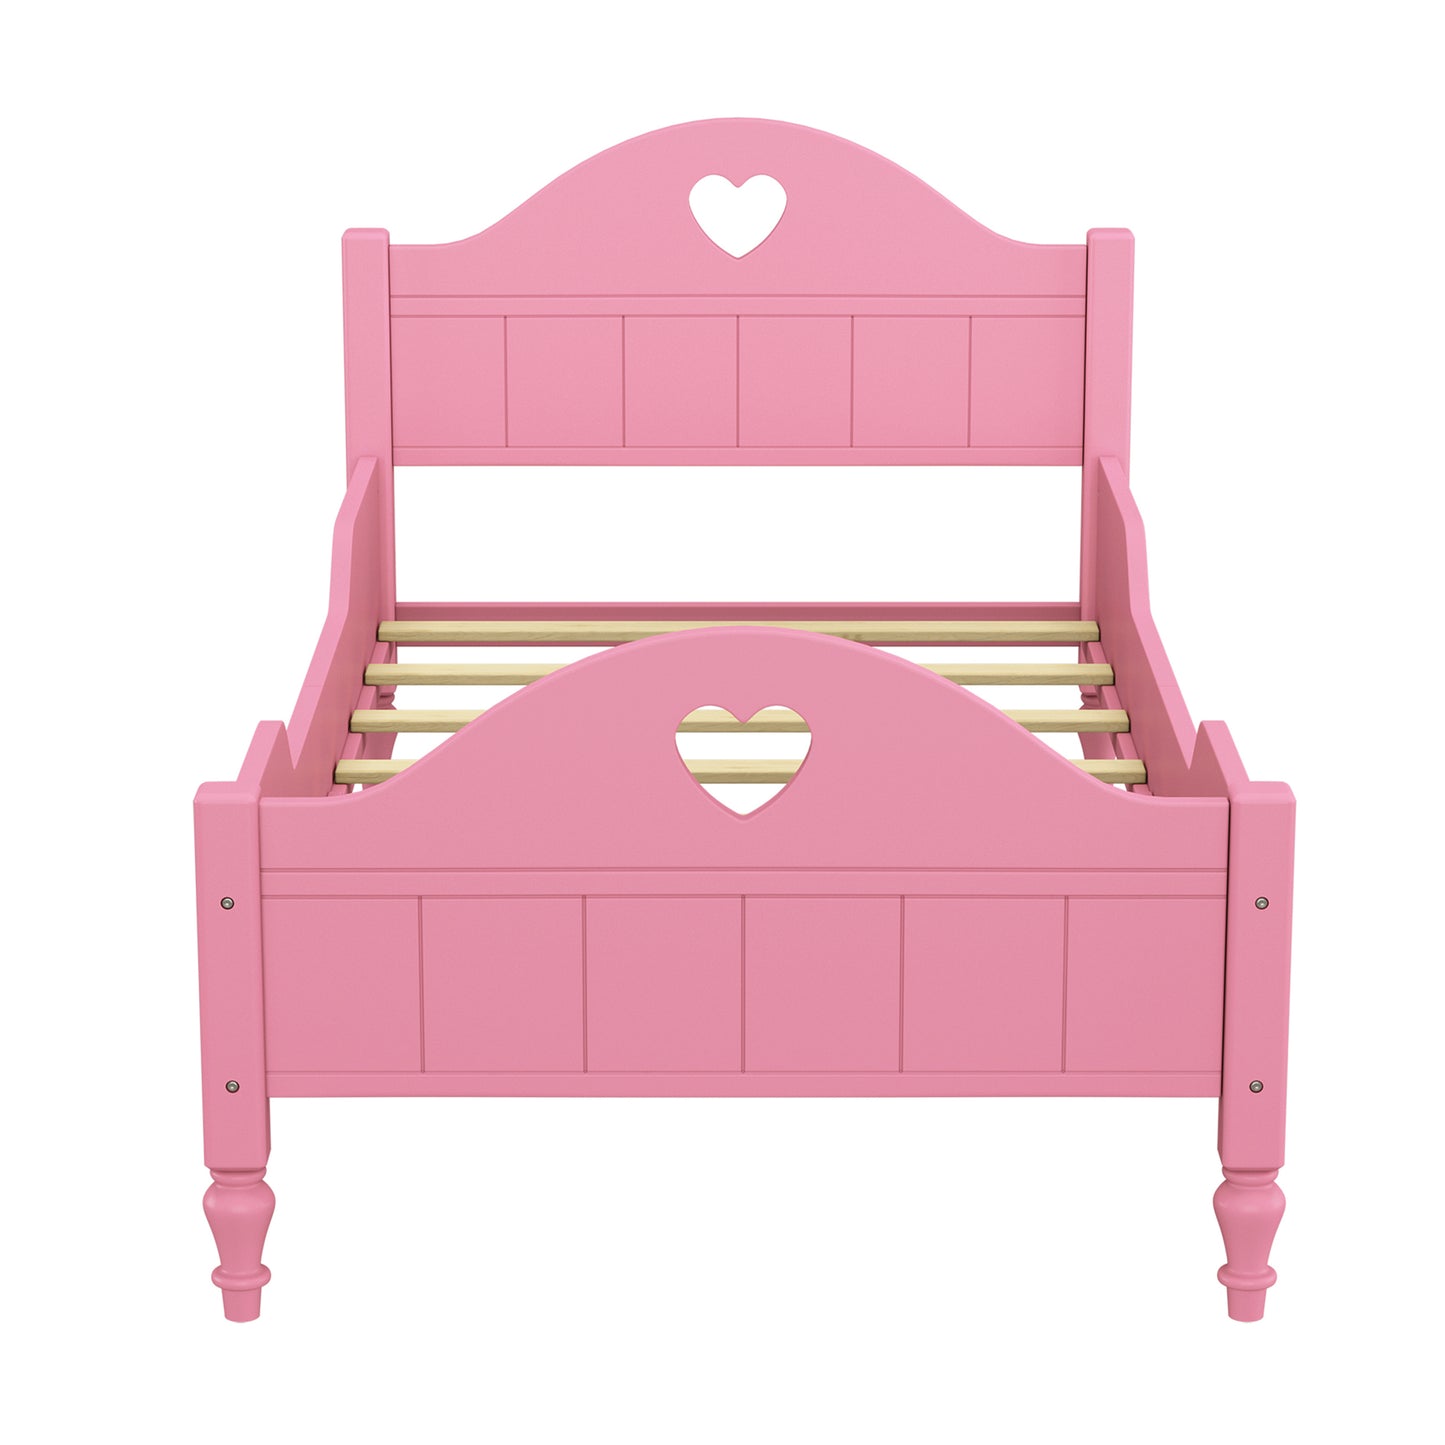 Macaron Twin Size Toddler Bed with Side Safety Rails and Headboard and Footboard,Light Pink